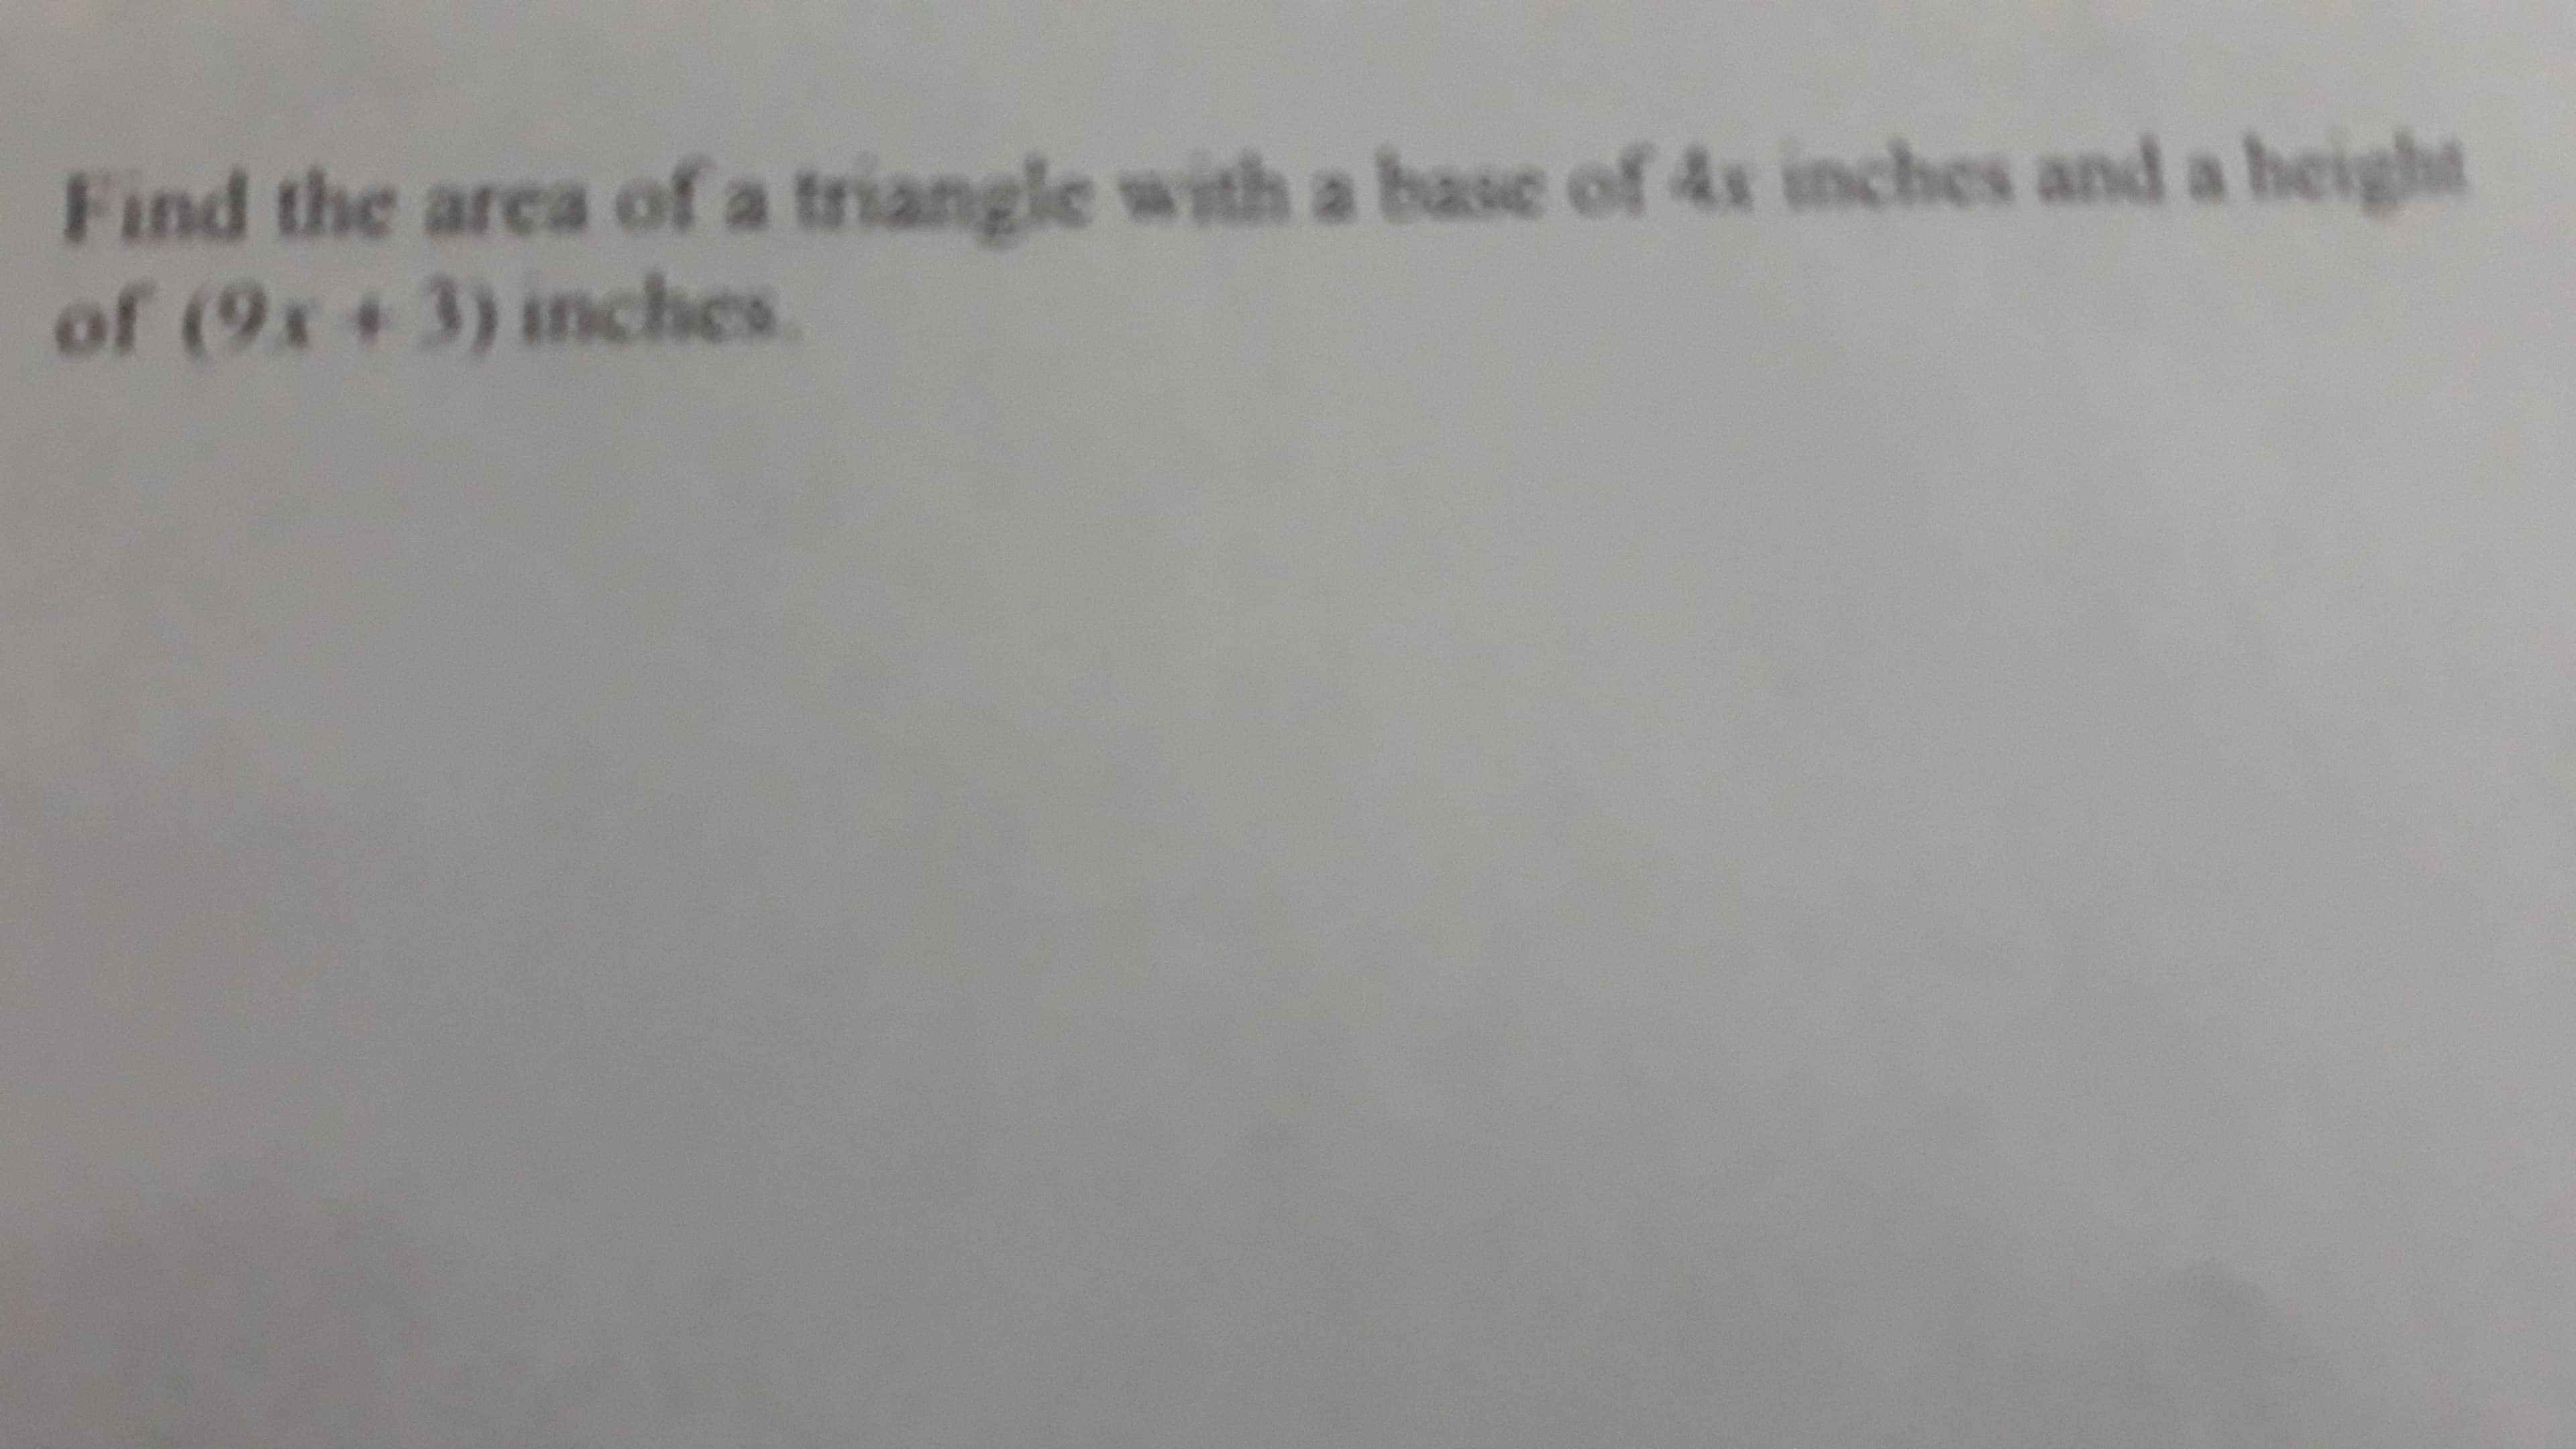 Find the area of a triangle with a base of 4s inches and a height
of (9x +3) inches.
